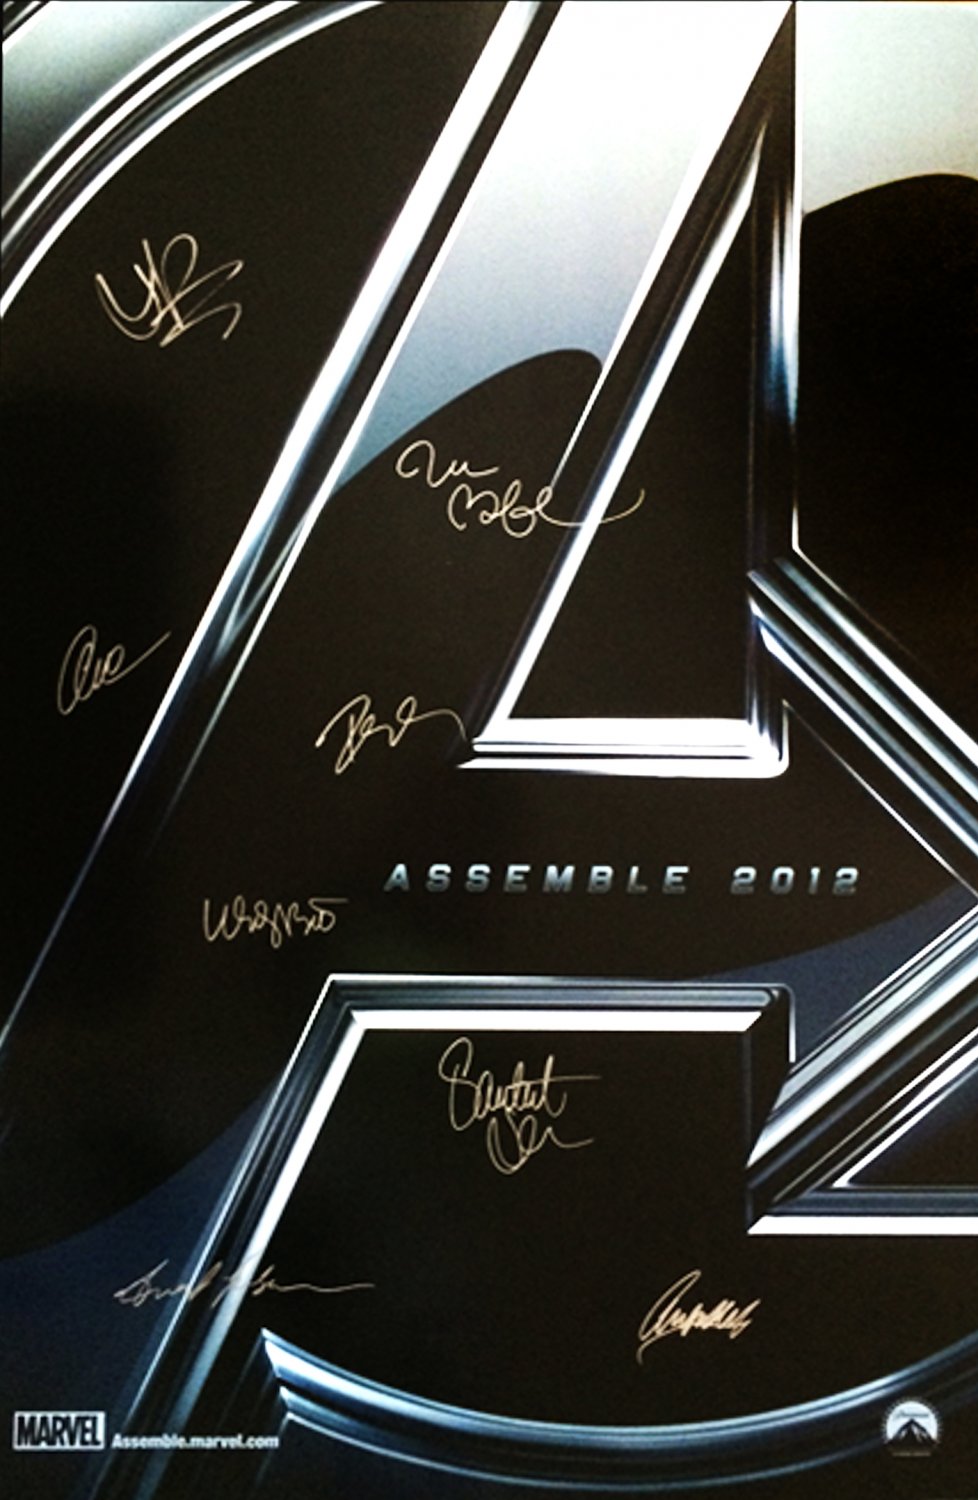 AVENGERS MOVIE POSTER SIGNED BY CAST